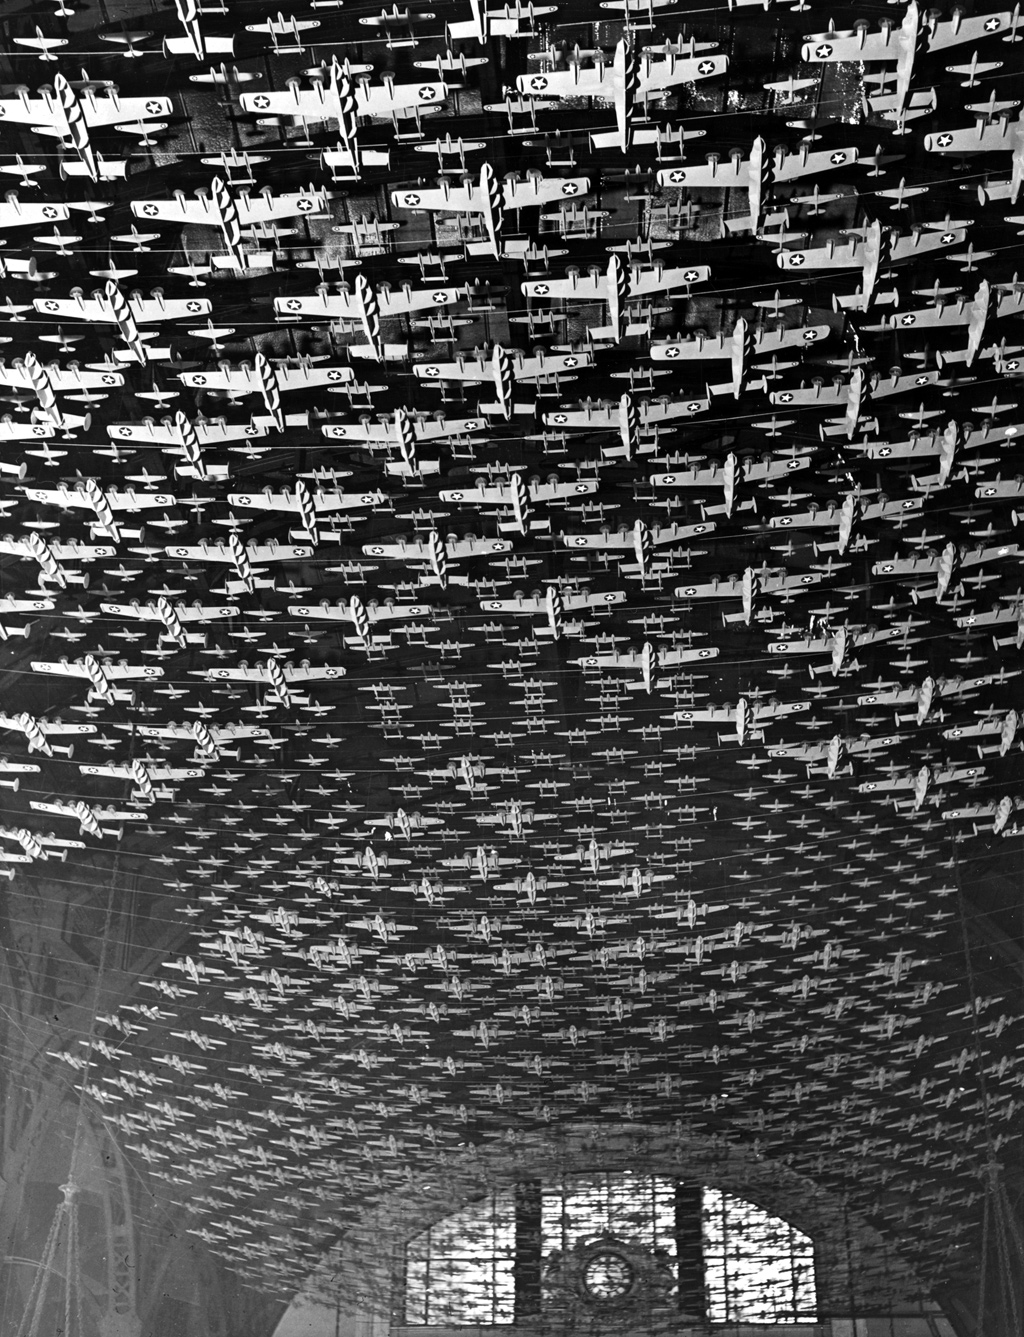 Model airplanes decorate the ceiling of the train concourses at Union Station in Chicago, Illinois. Jack Delano, 1943. View full size.